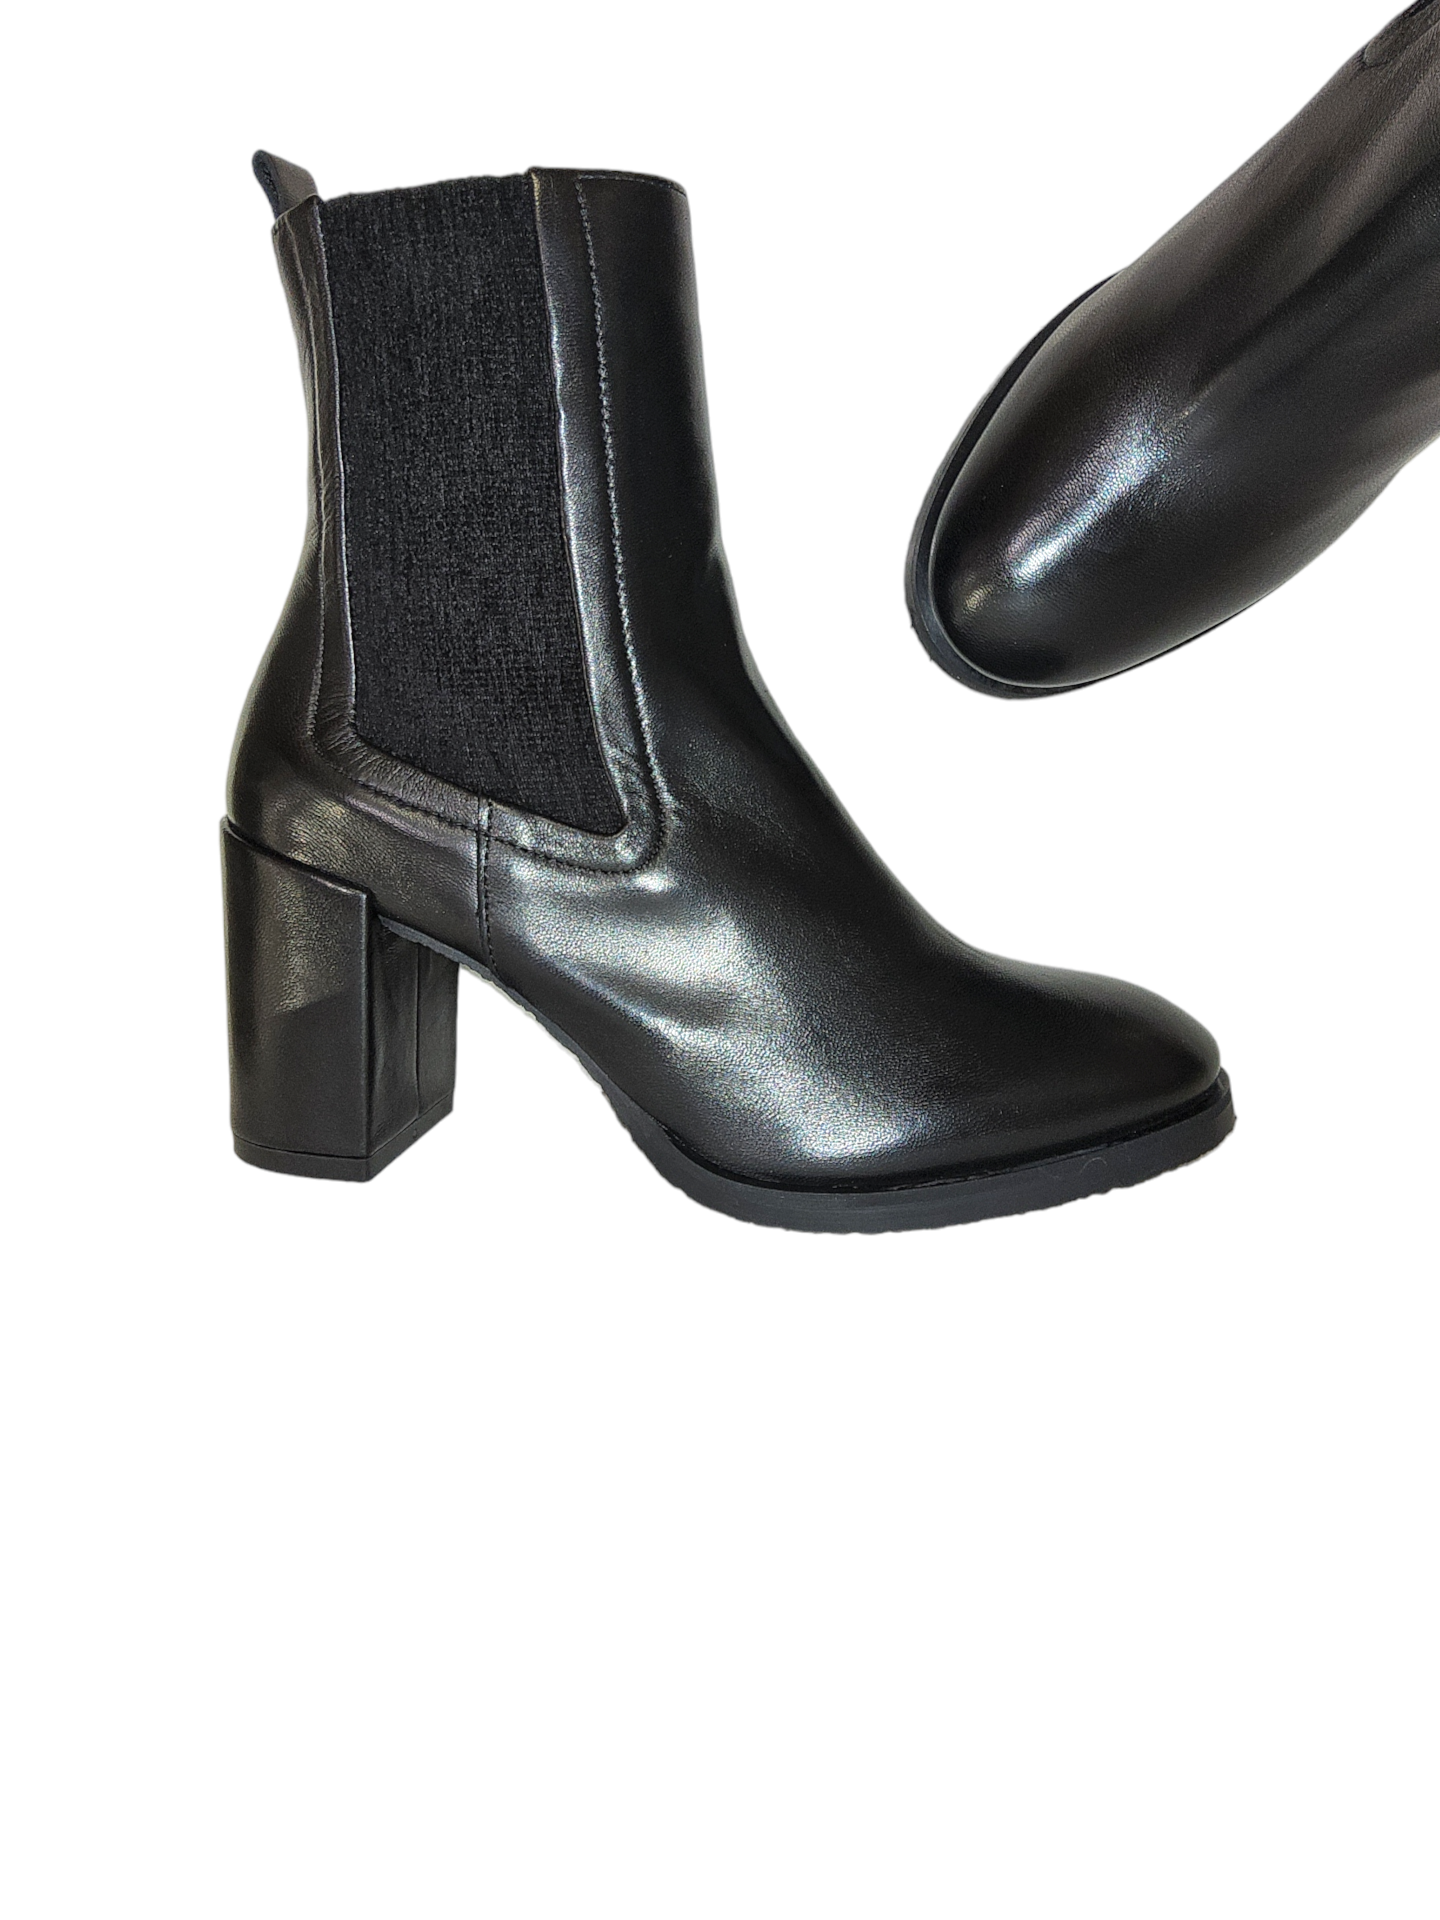 Black leather Chelsea boot